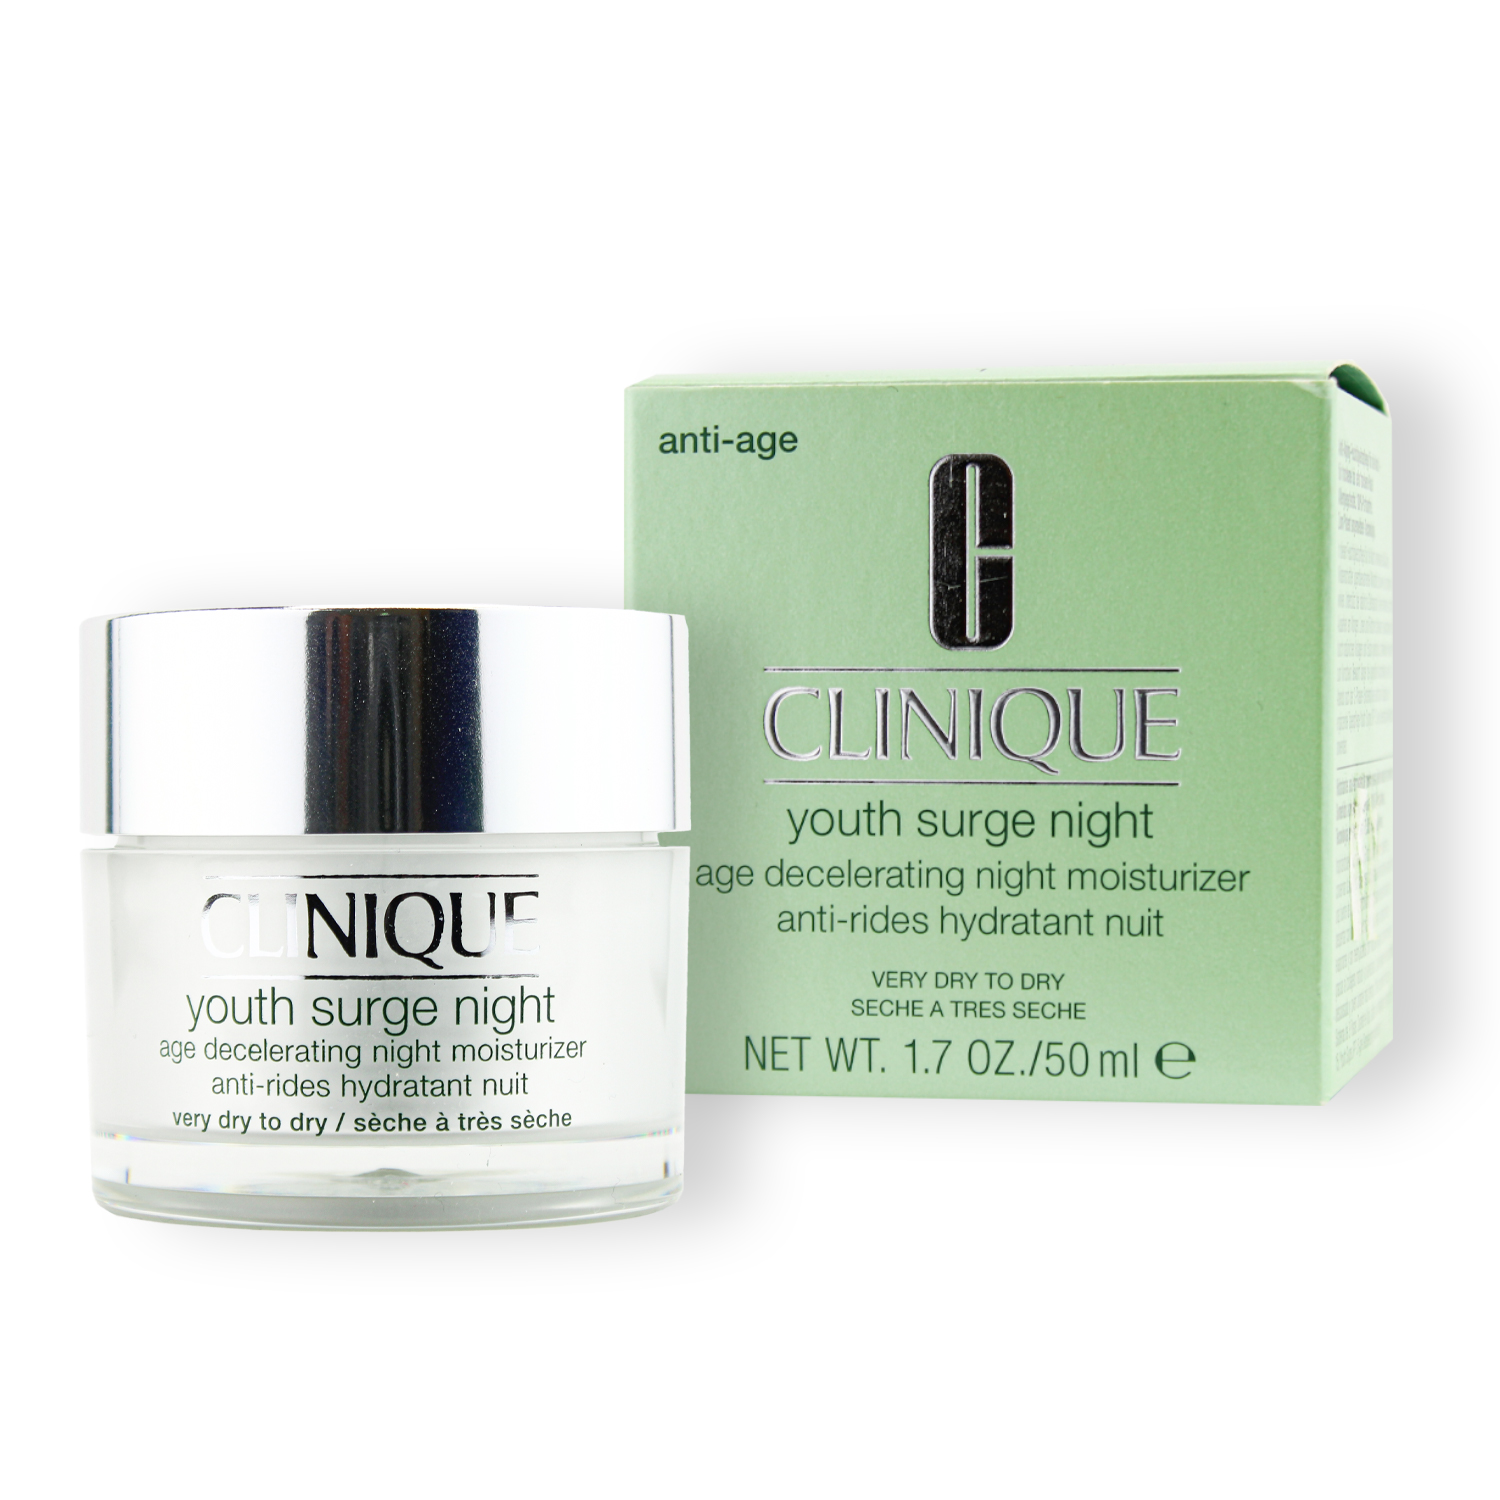 Clinique Youth Surge Night Age Decelerating Night Moisturizer Dry To Very Dry Skin 50ml